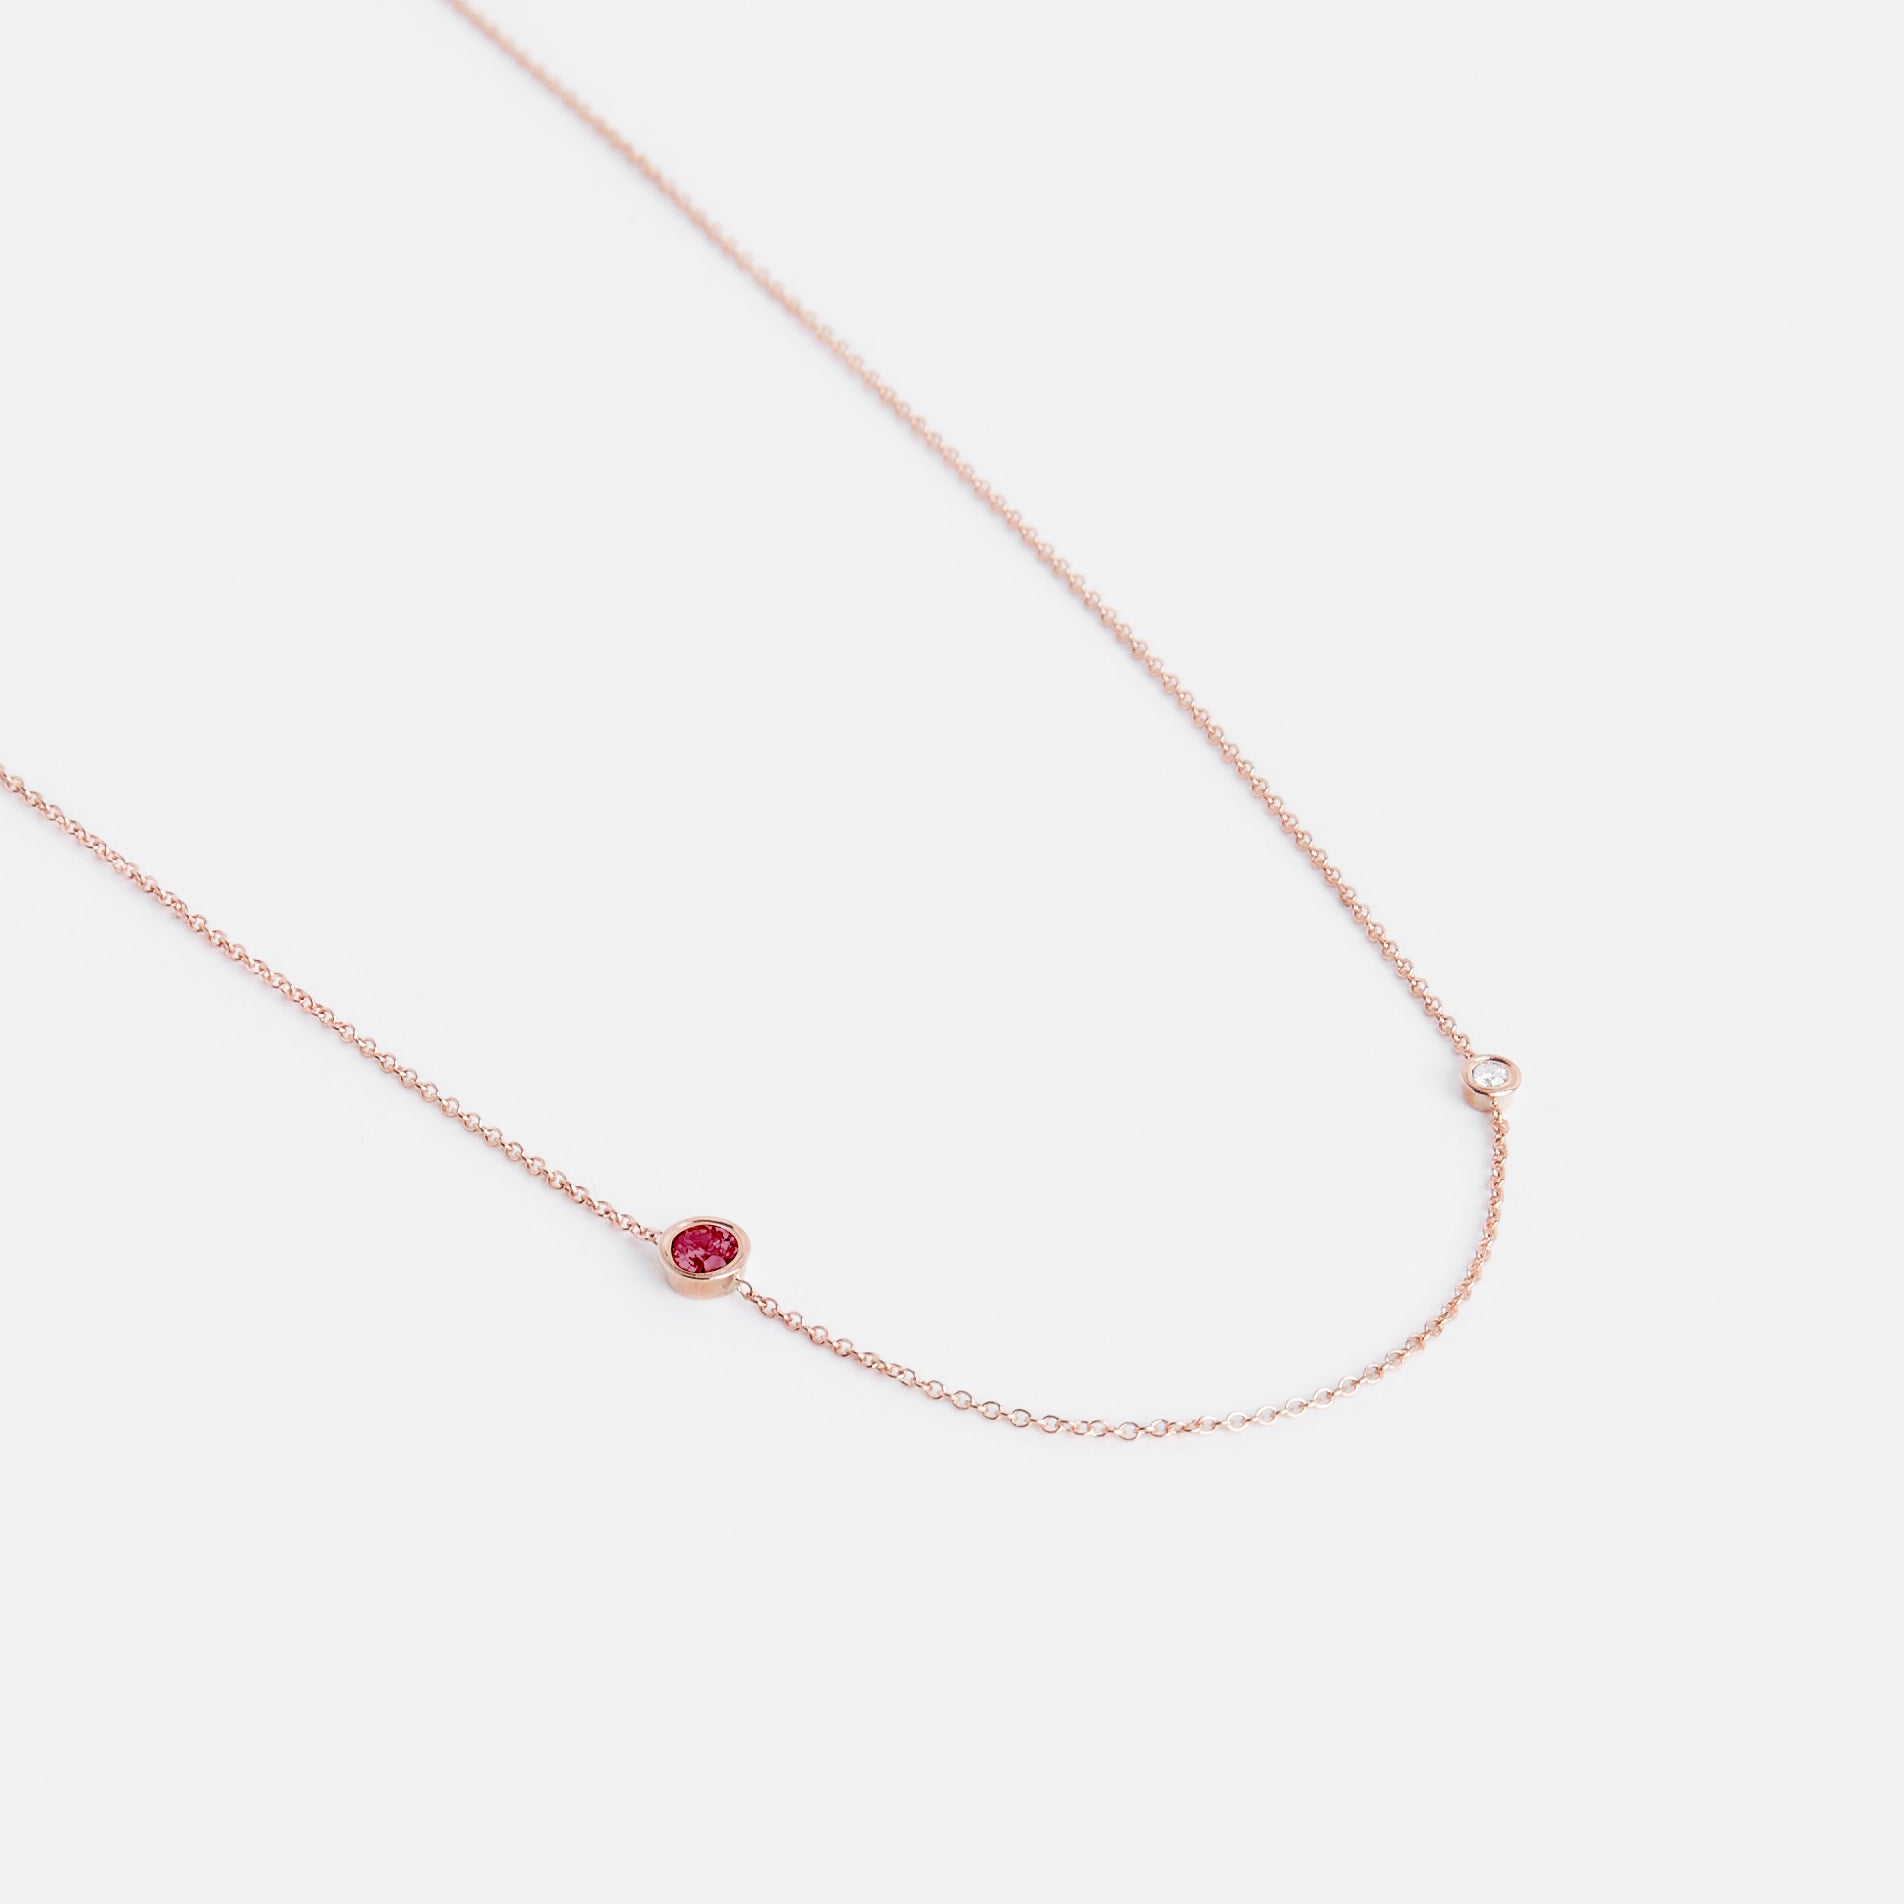 Iba Designer Necklace in 14k Rose Gold set with Ruby and White Diamond By SHW Fine Jewelry NYC